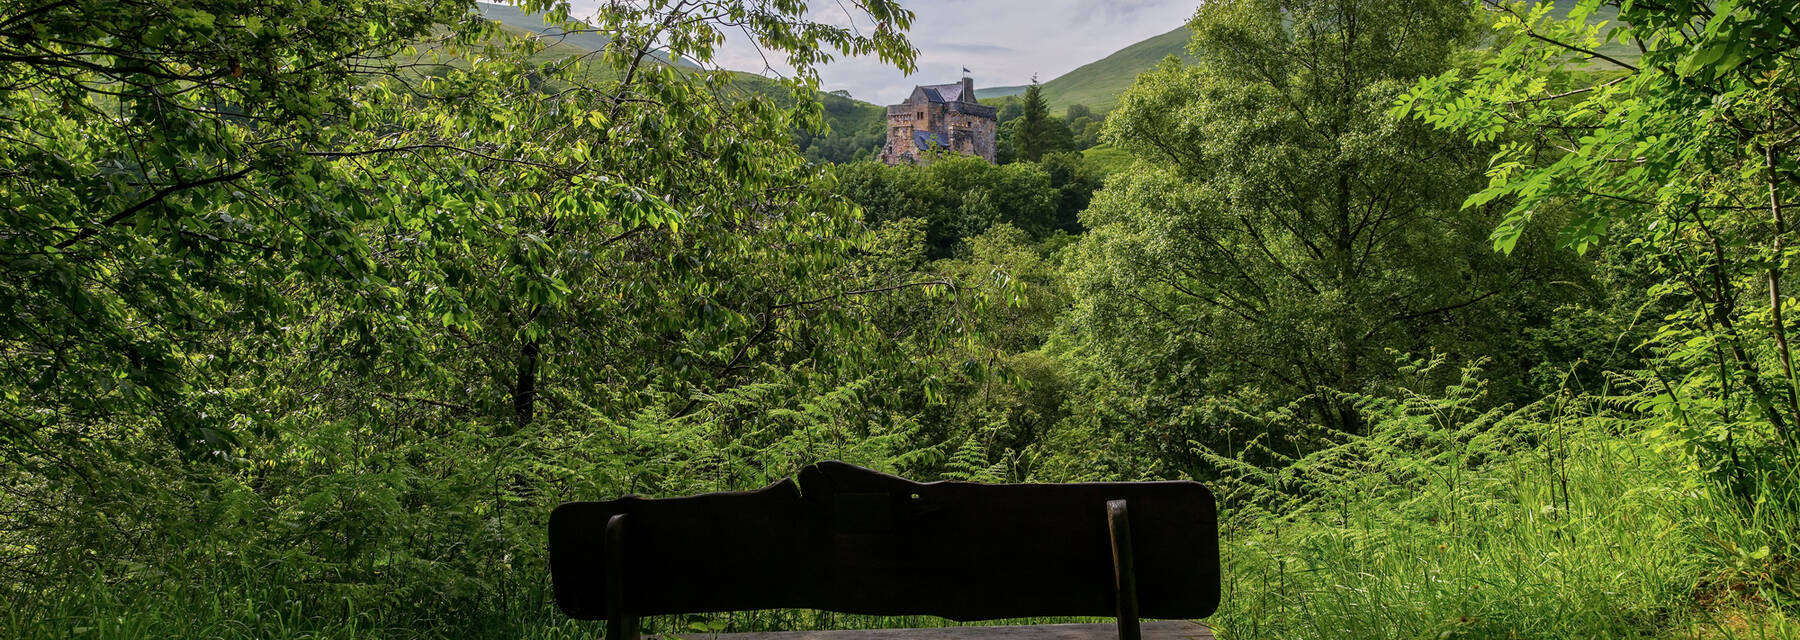 Dollar Glen with bench and Castle Campbell in distance